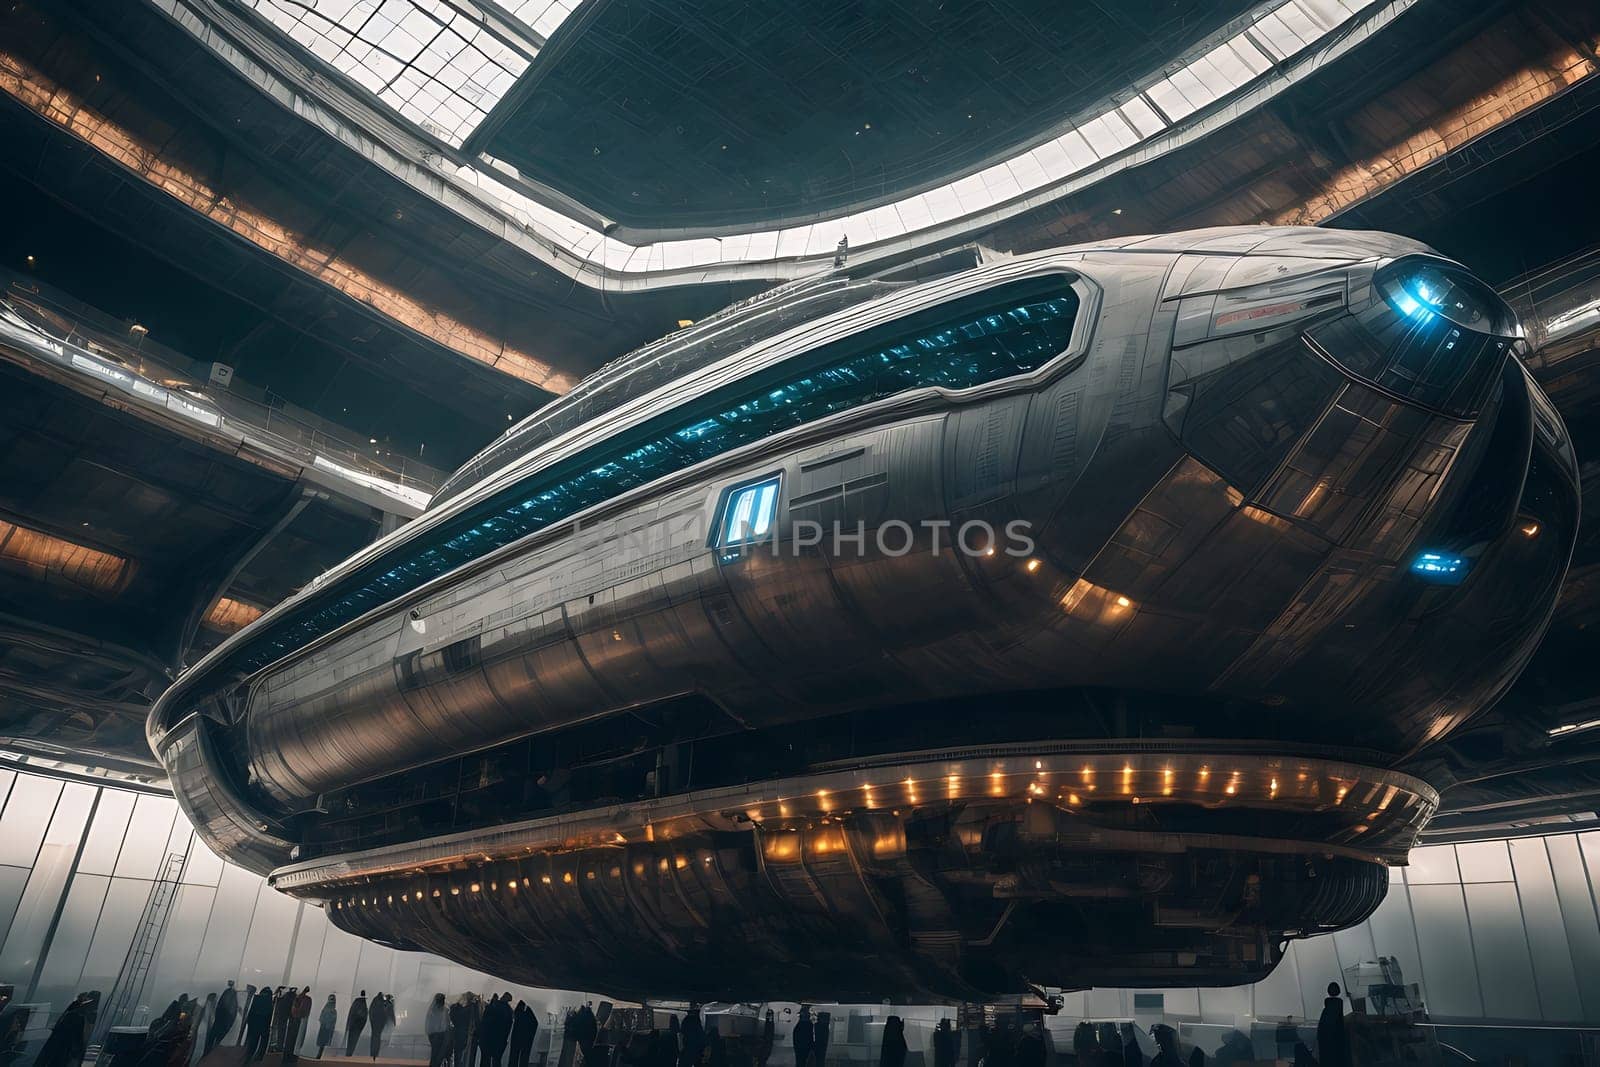 An image of a sleek and advanced train situated within a massive edifice, displaying a futuristic ambiance.